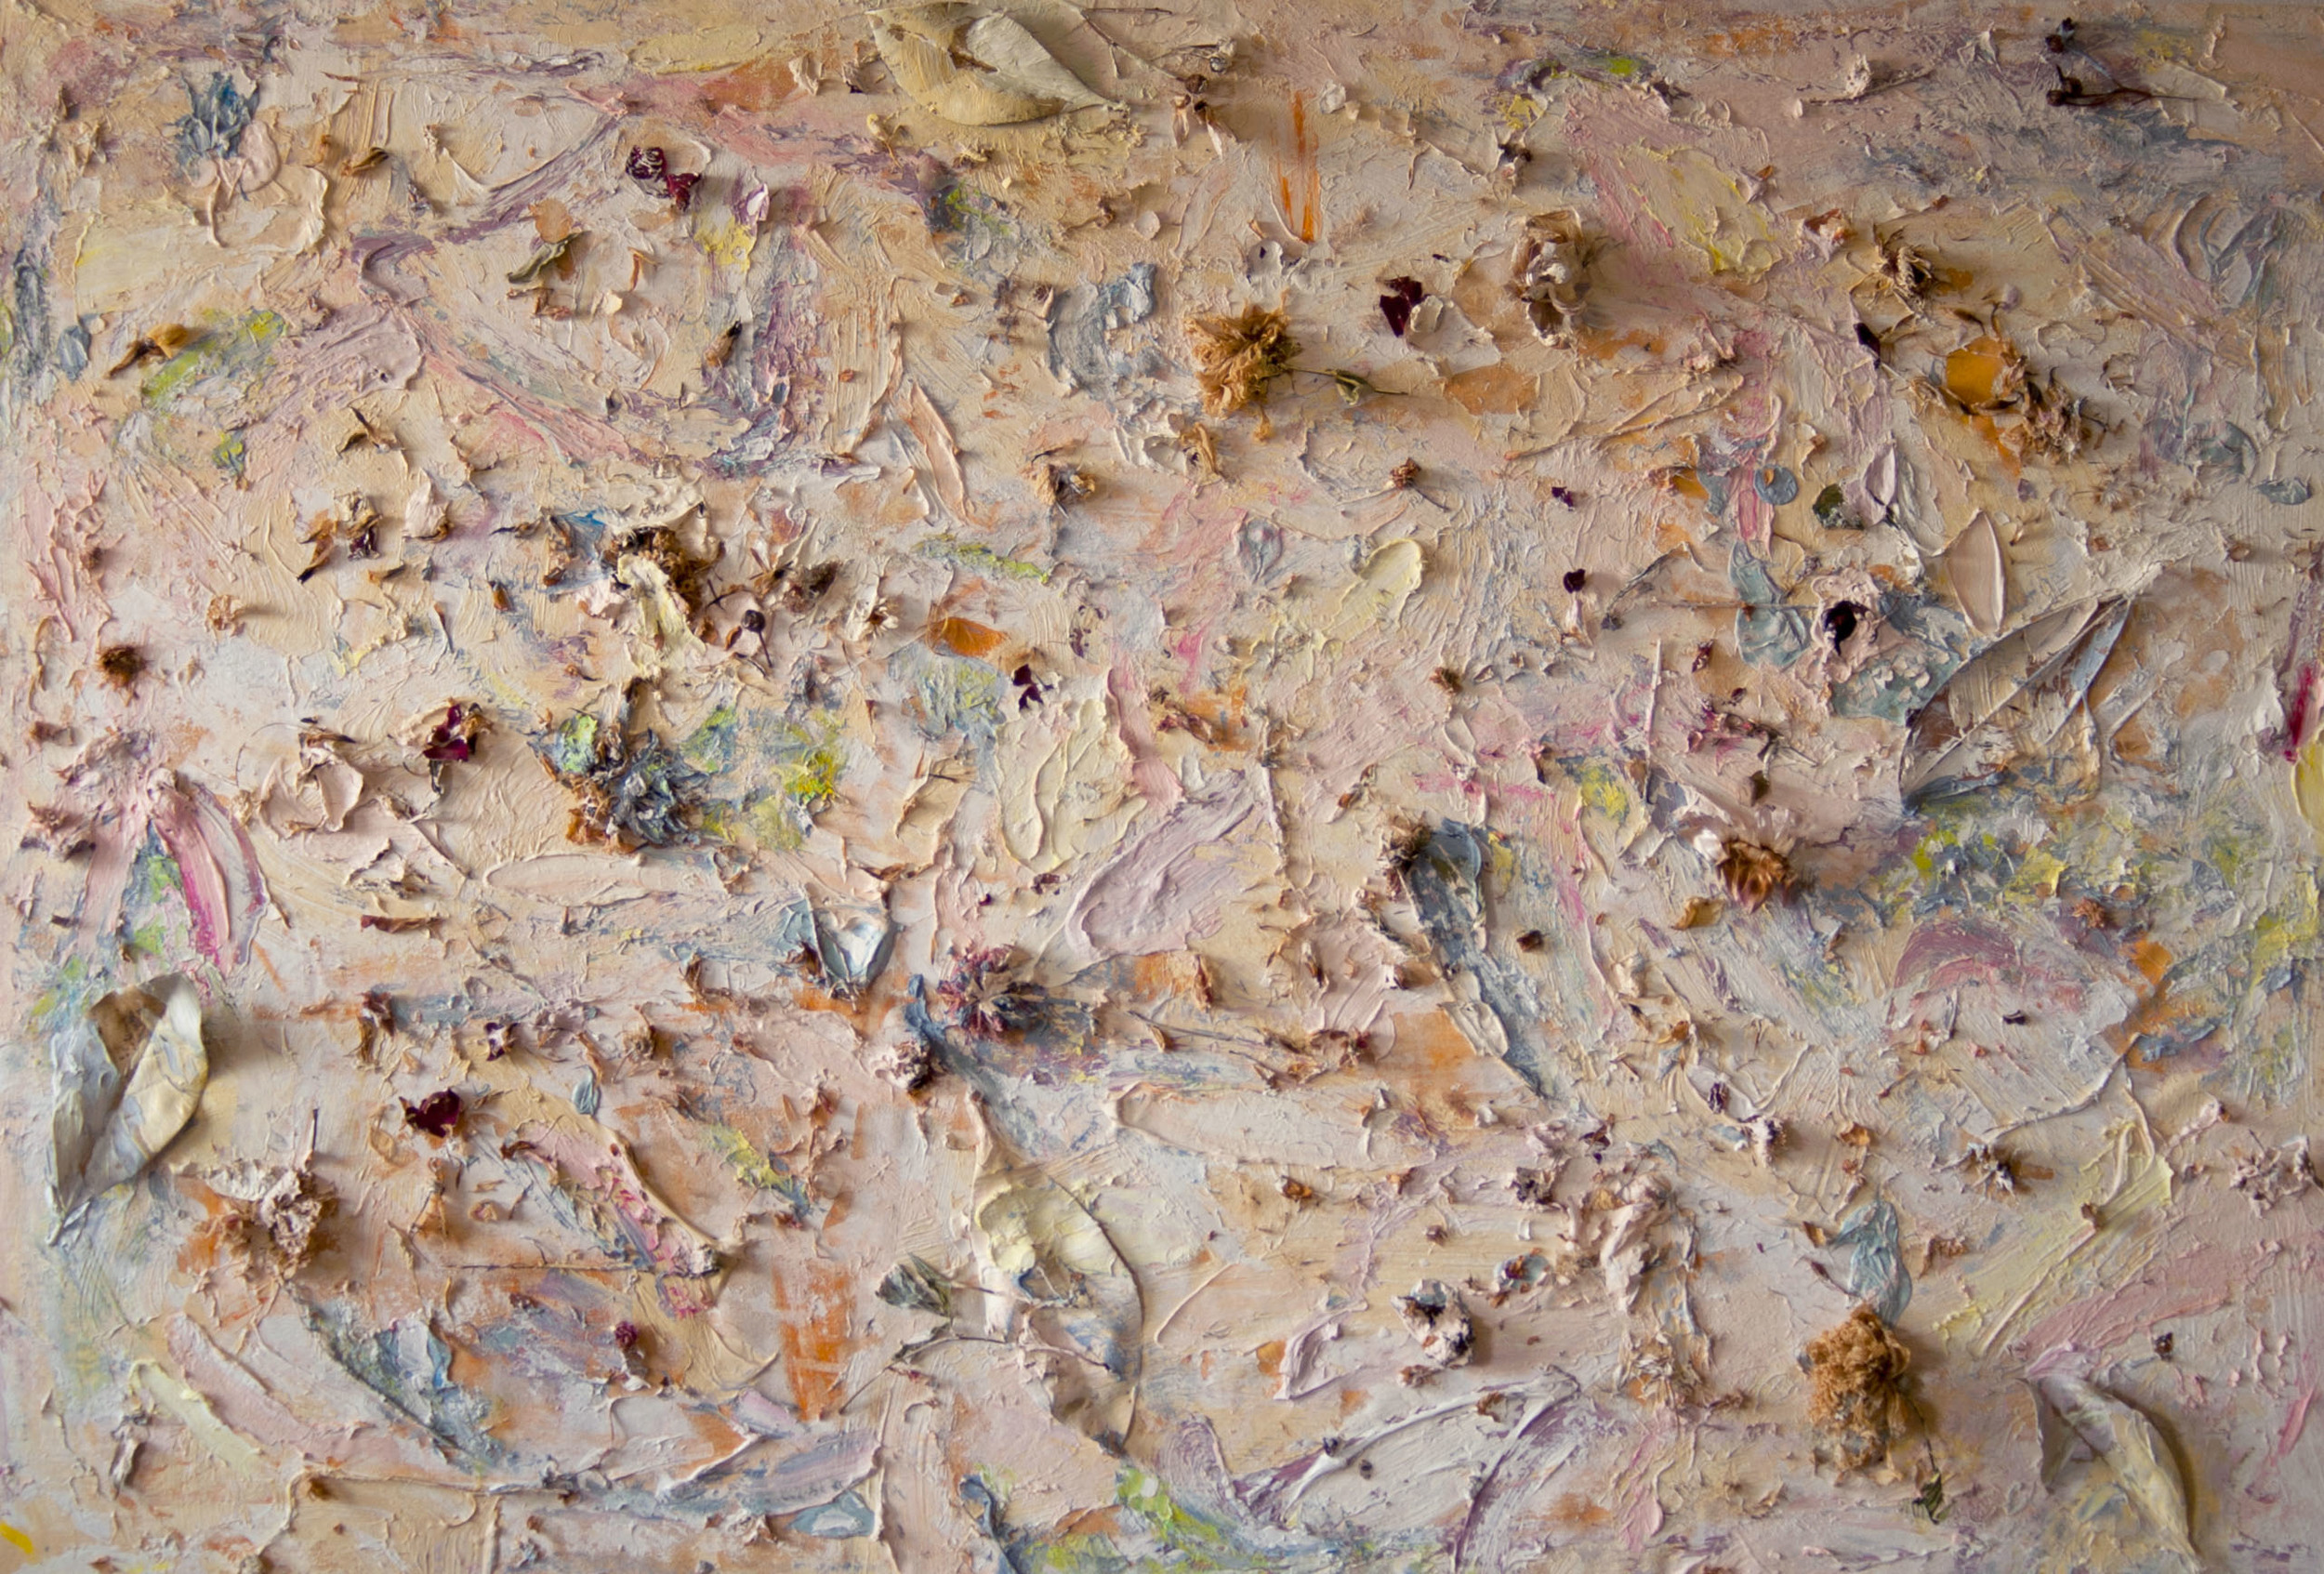  untitled i (4), New York City, 2015    oil, dried foliage, and egg shells on unprimed canvas    42 x 60 inches 